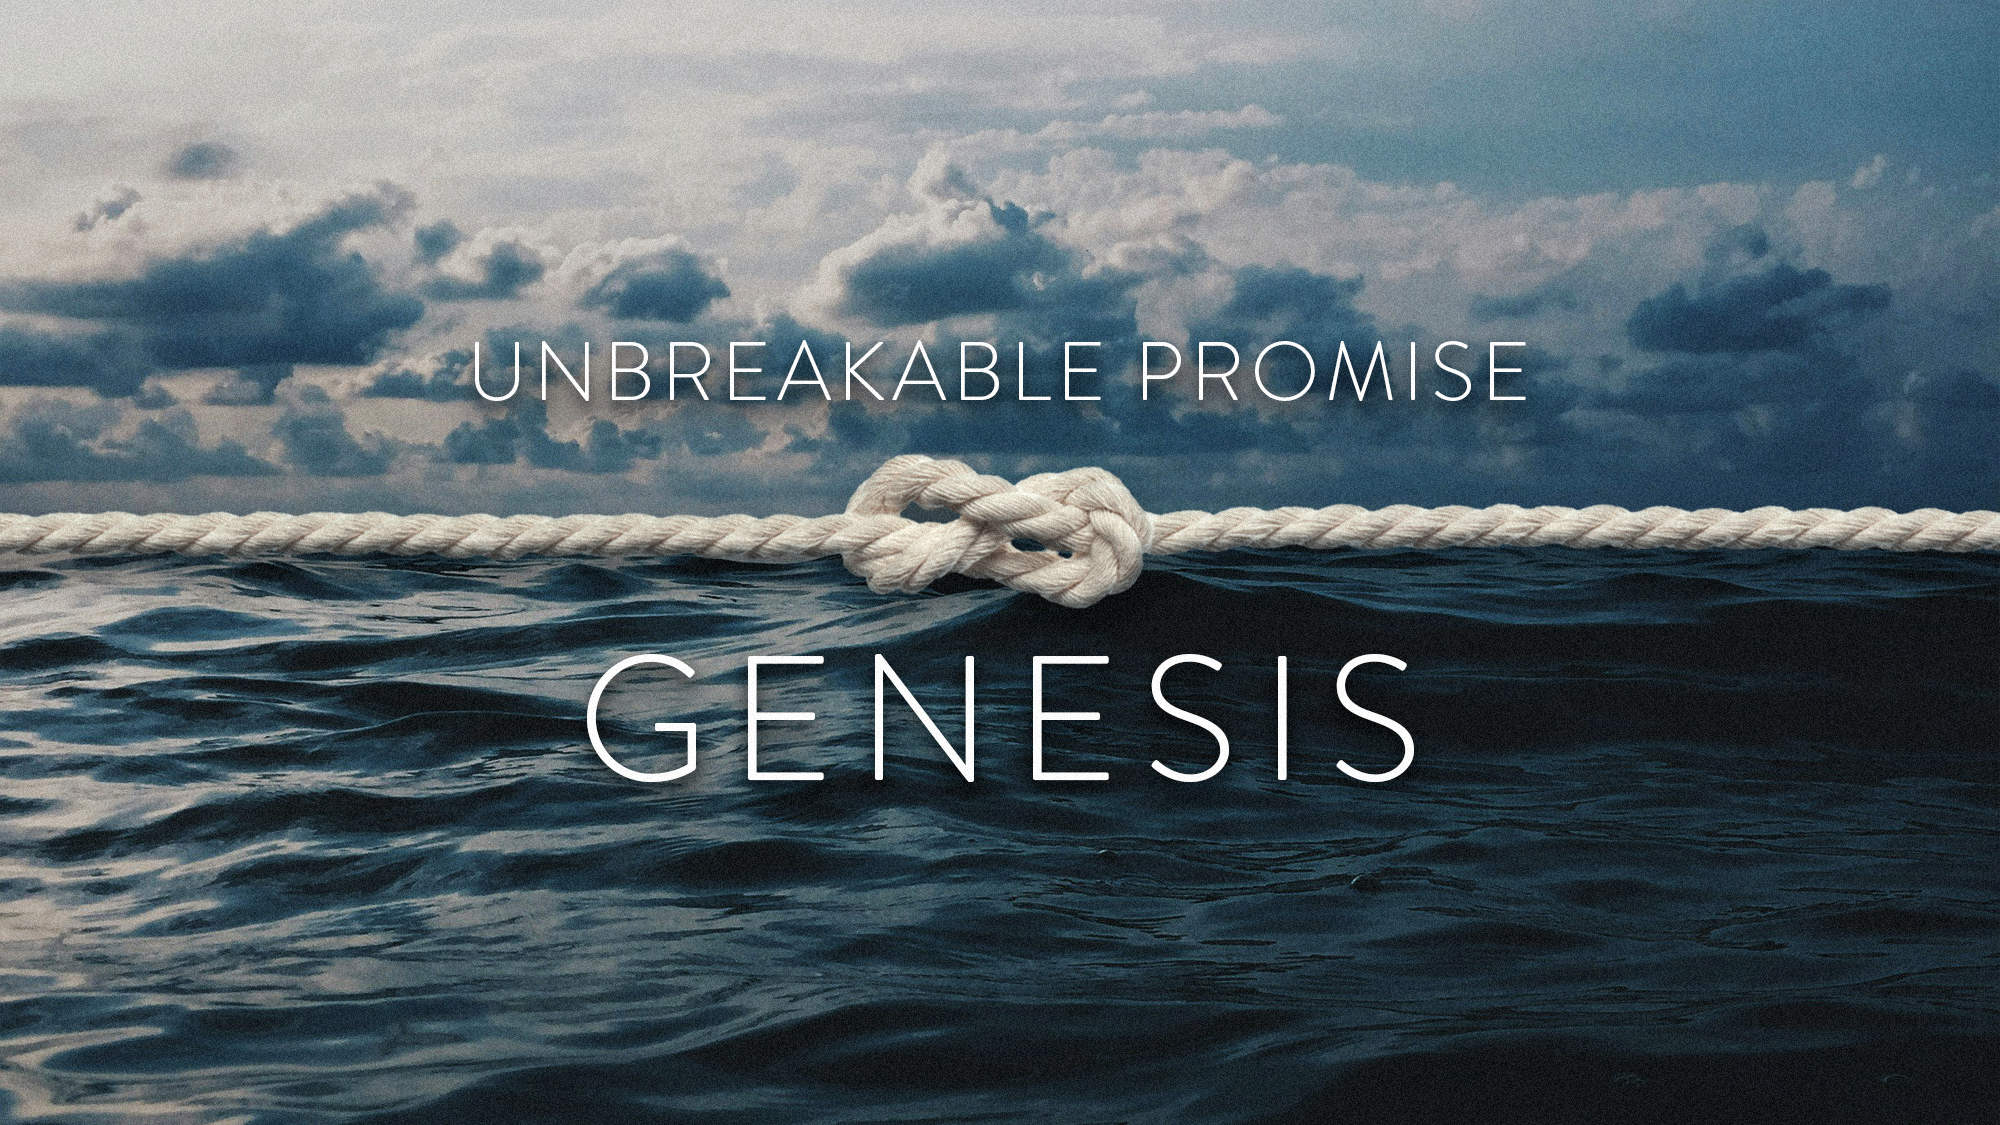 Unbreakable promise: of victory